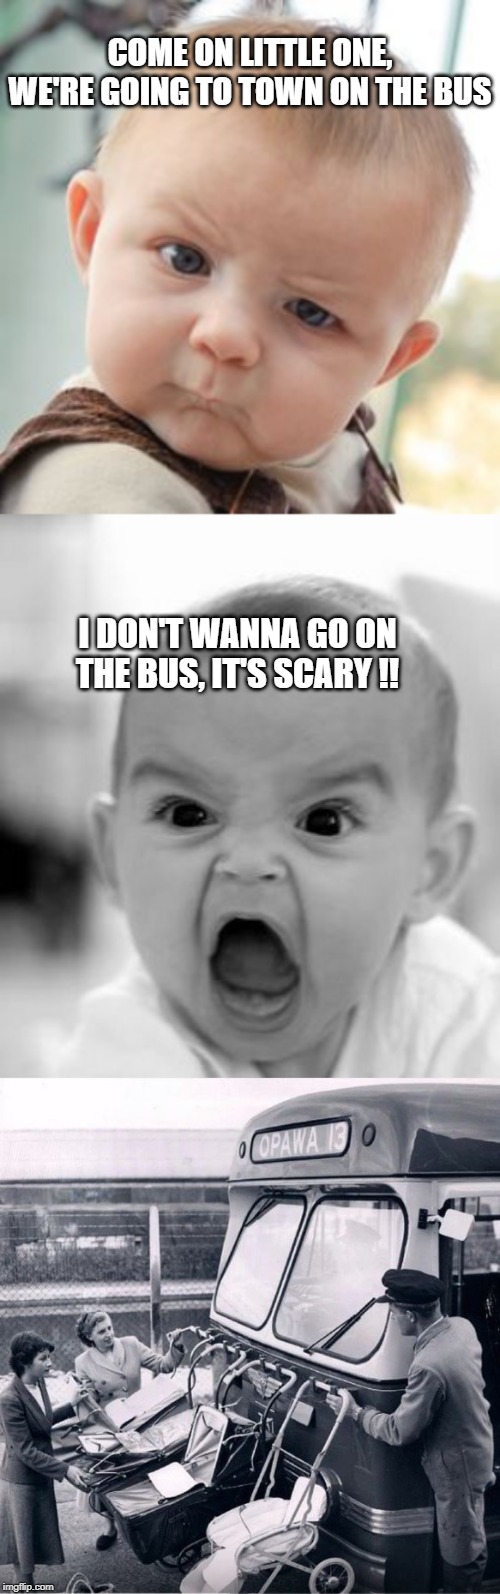 hold on tight ! | COME ON LITTLE ONE, WE'RE GOING TO TOWN ON THE BUS; I DON'T WANNA GO ON THE BUS, IT'S SCARY !! | image tagged in memes,skeptical baby,angry baby,bus ride | made w/ Imgflip meme maker